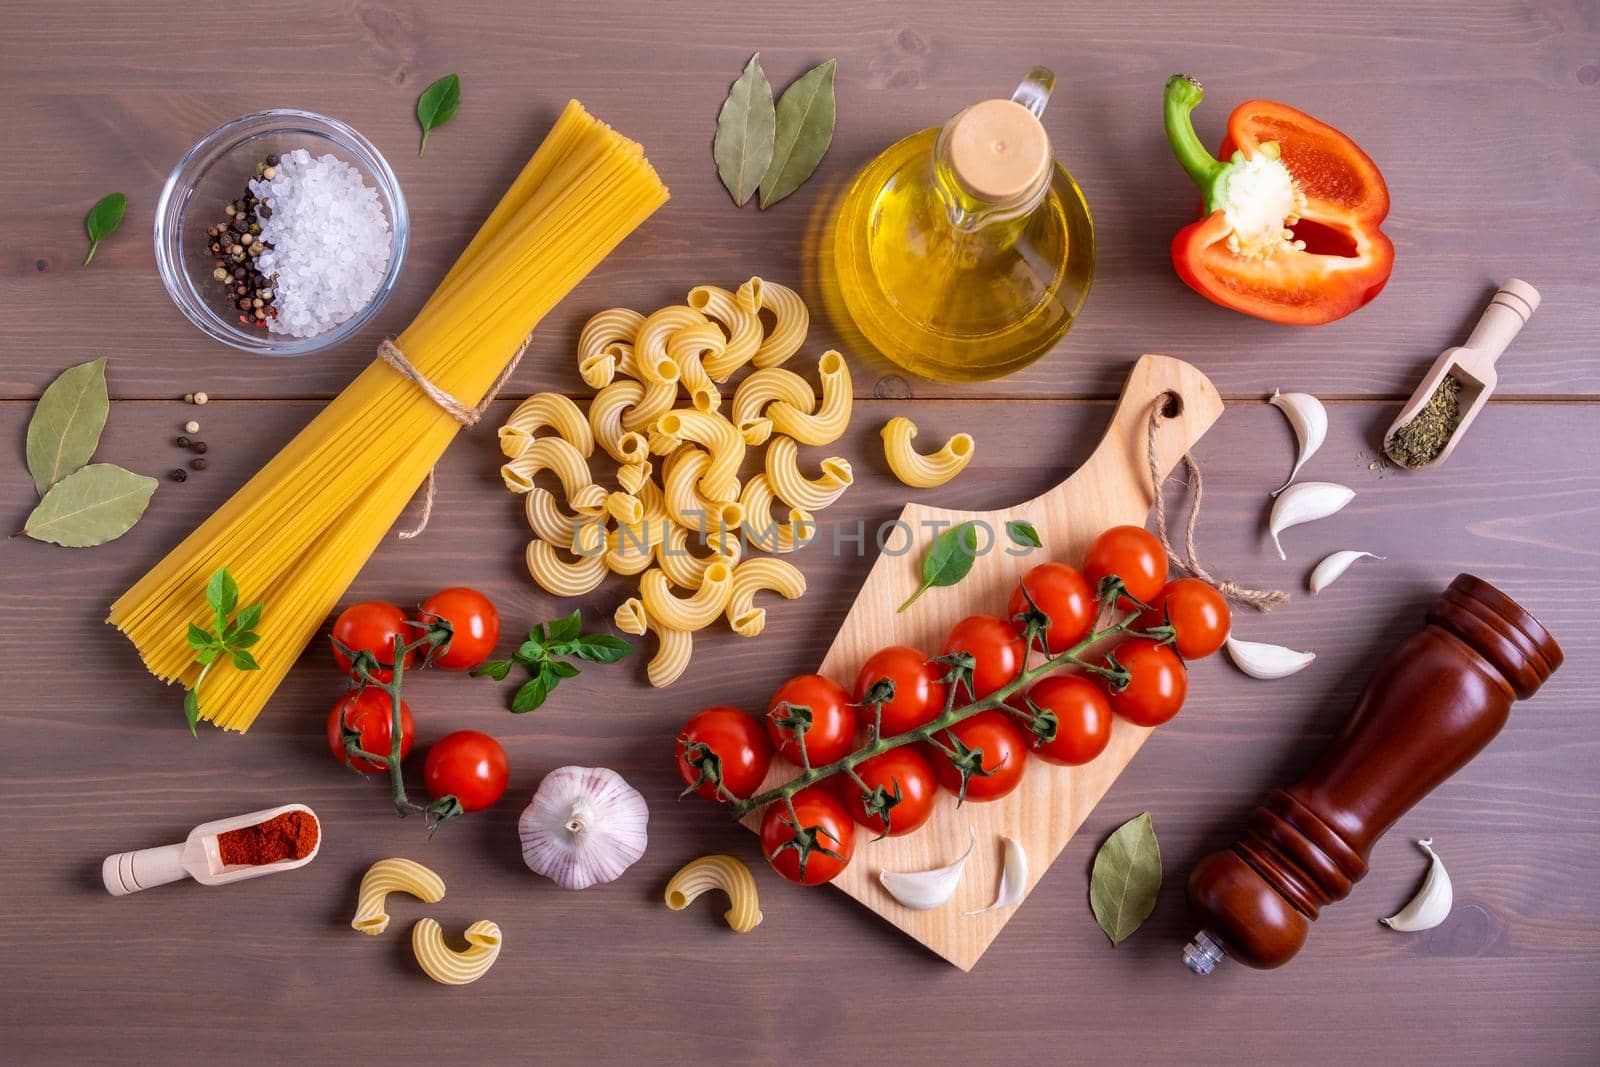 Close-up top view of ingredients for making Italian pasta. Healthy and wholesome food concept. Selective focus.